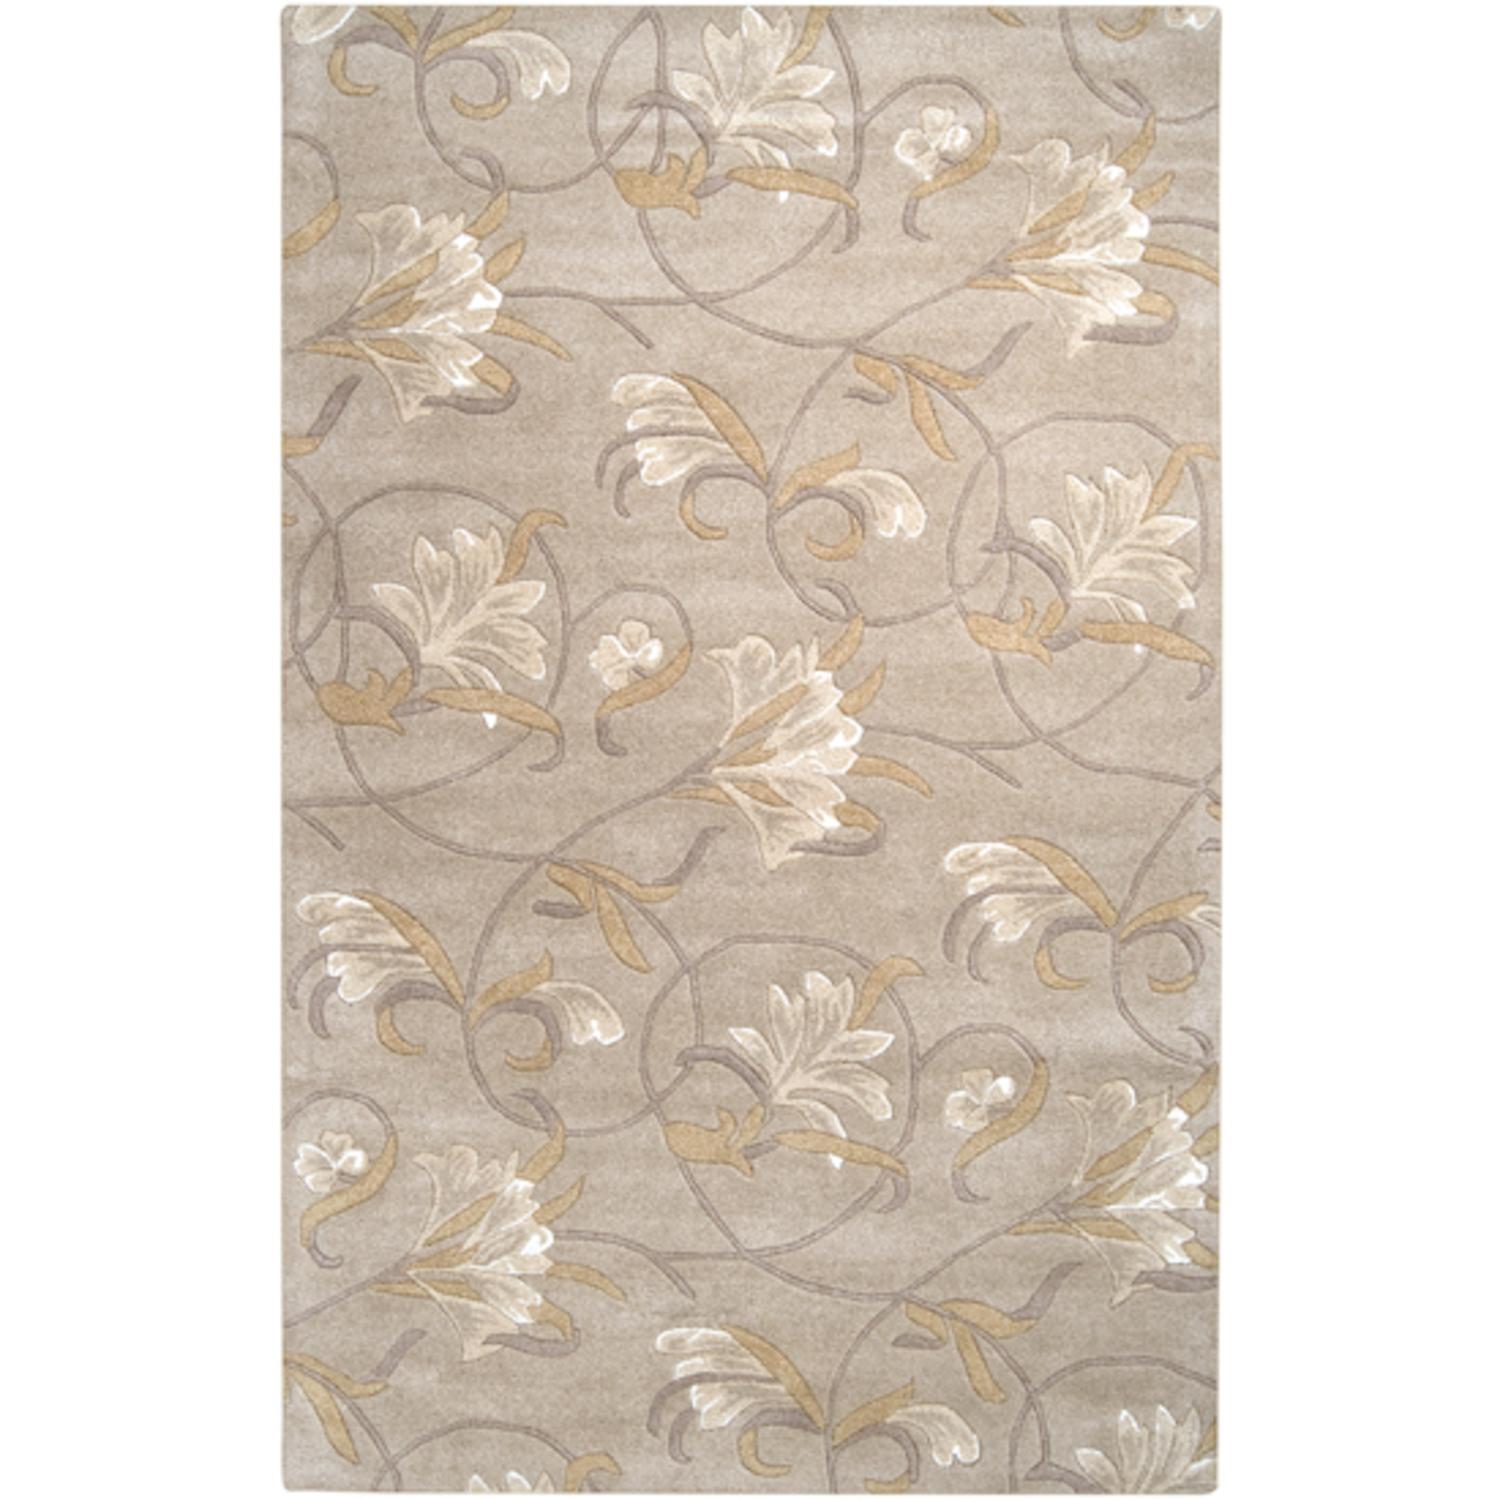 CC Home Furnishings  8' x 11' Floral Trumpets Papyrus and Dark Khaki Wool Area Throw Rug